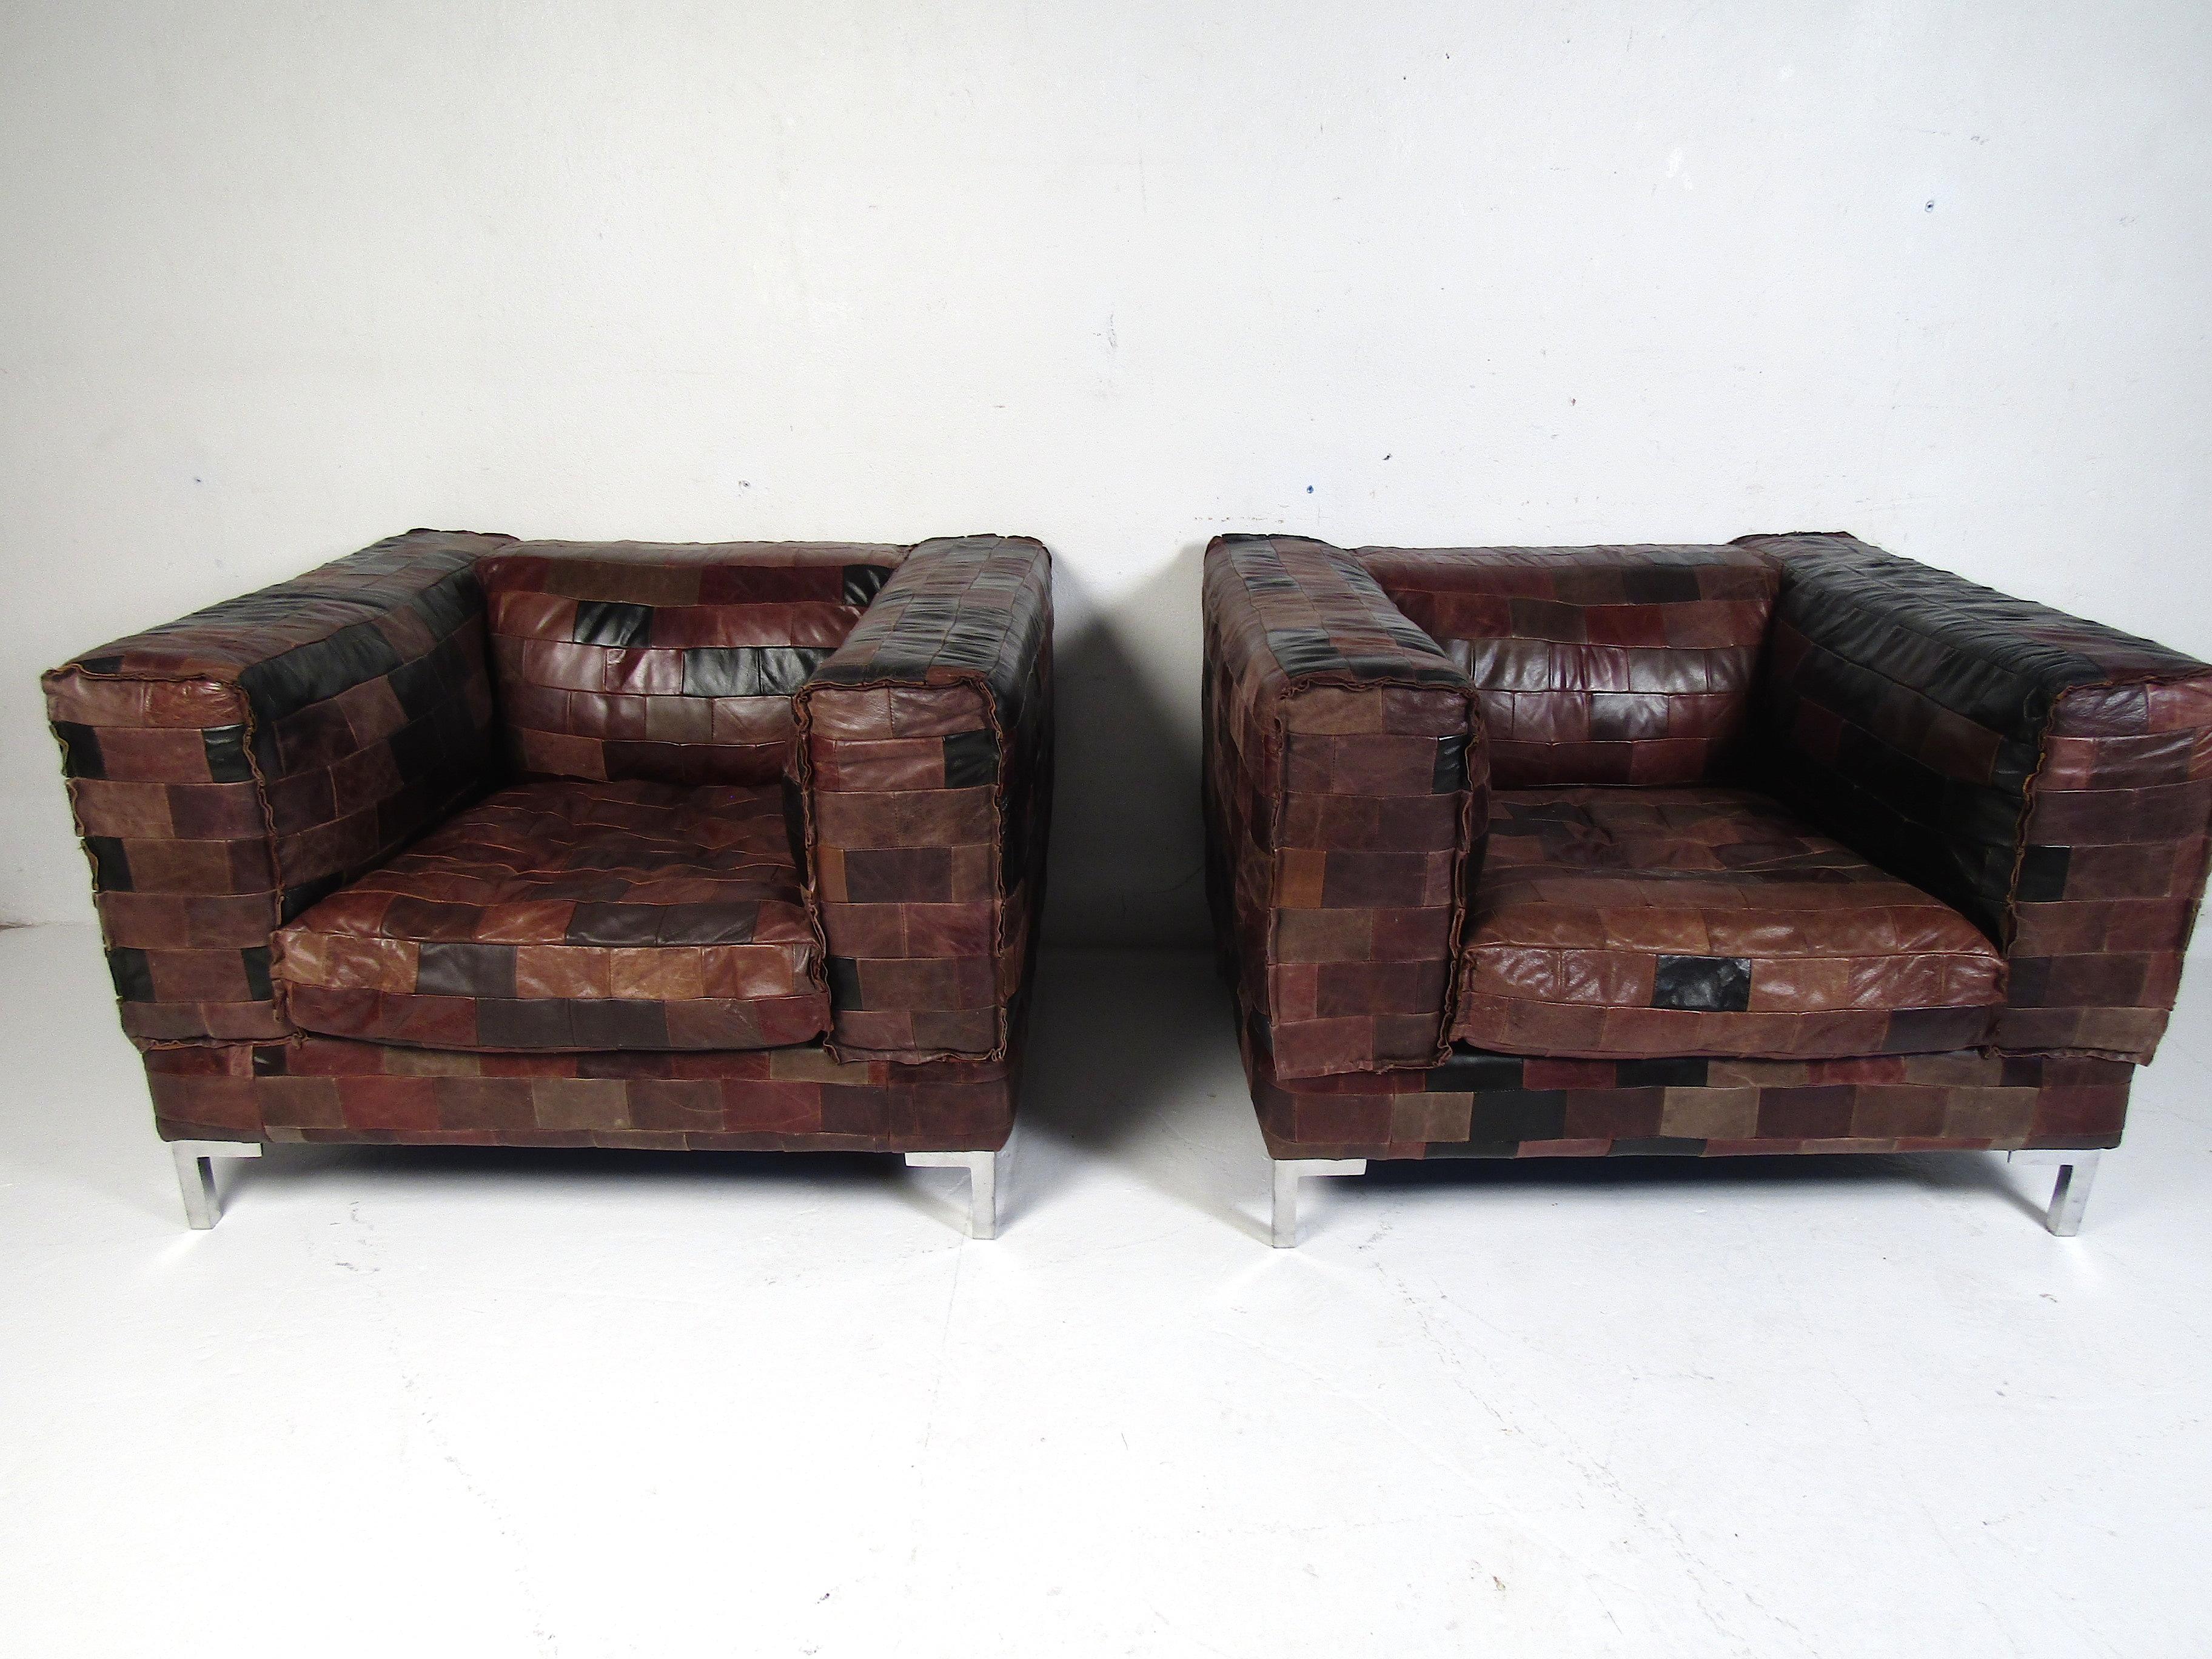 Very unusual and stylish pair of club chairs with a leather-patchwork upholstery. Spacious and comfortable chairs, supported by chrome-plated leg supports. Reminiscent of Paul Evans' designs. Please confirm item location with dealer (NJ or NY).